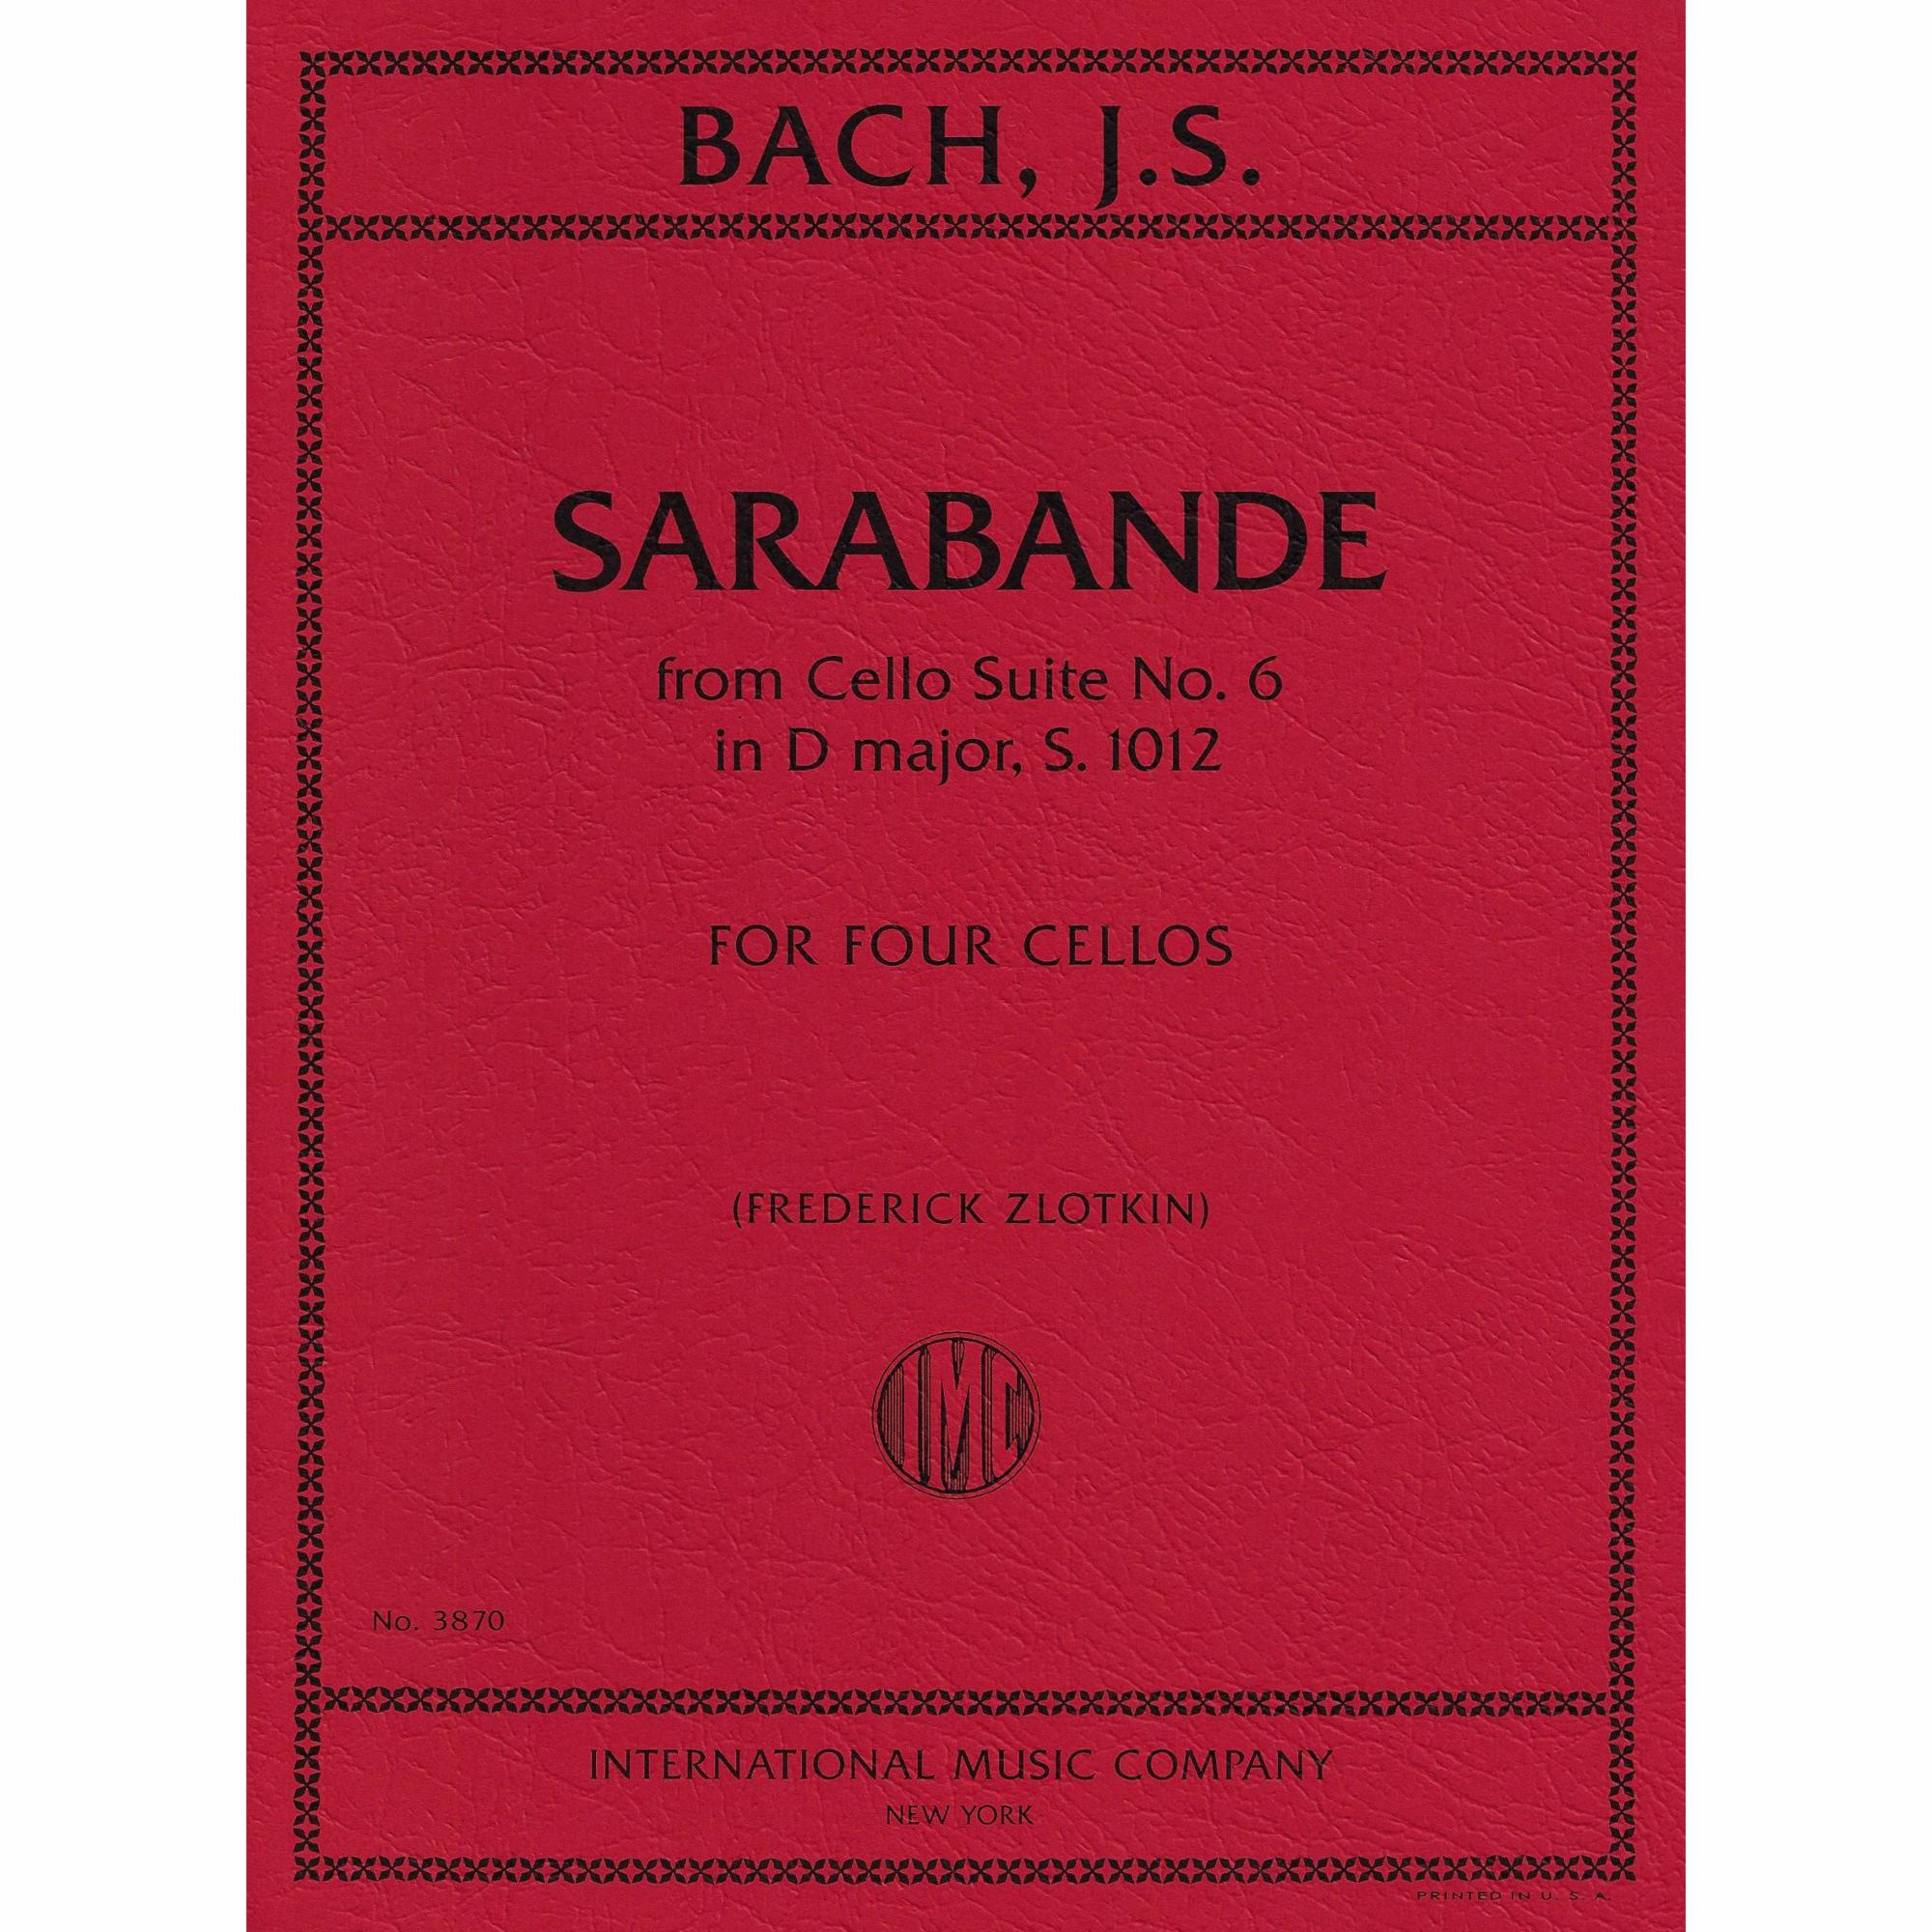 Bach -- Sarabande, from Cello Suite No. 6 in D Major, S. 1012 for Four Cellos